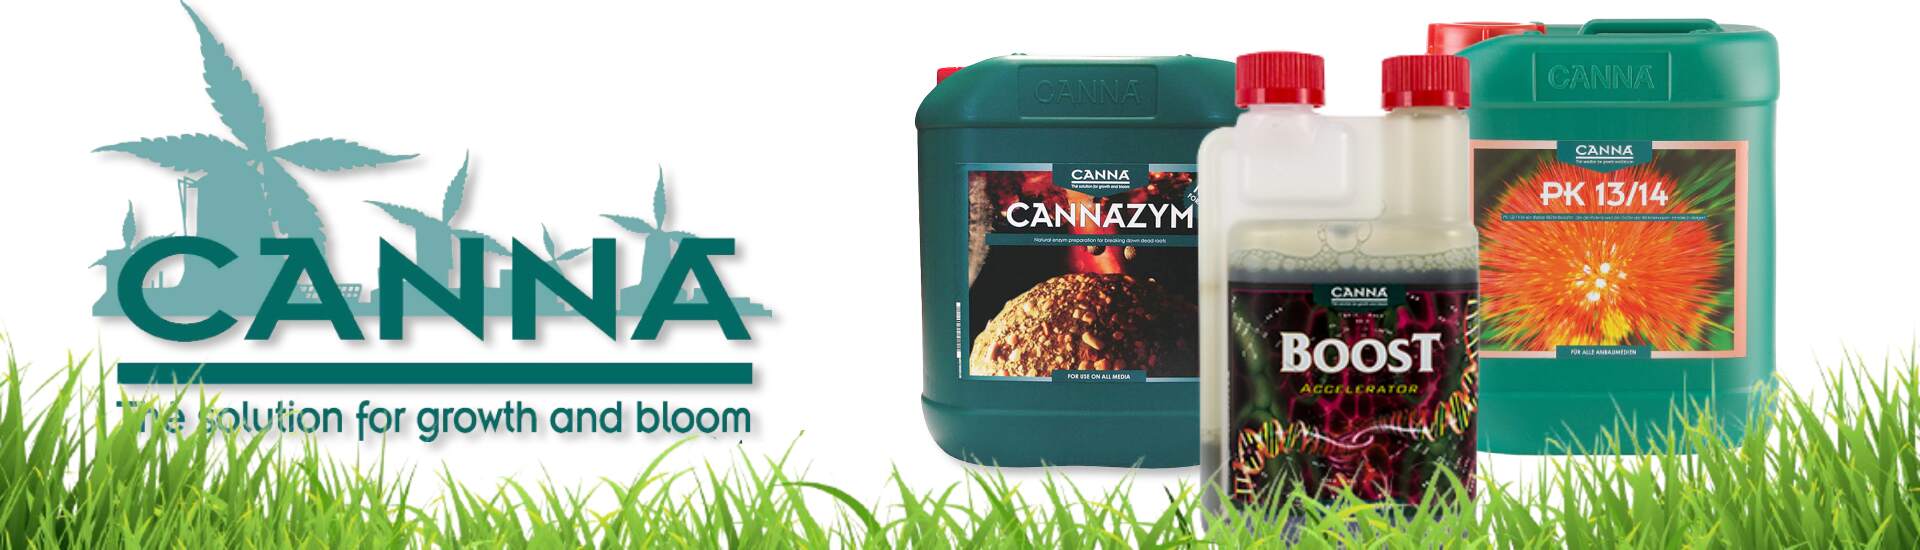 CANNA is thé producer of nutrients and growing mediums for the cultivation of fast growing plants. Ever since the founding in the early 90s, all products are scientifically tested first, before put on the market. But even before the company was established, the founders were already scientifically pioneering with plants.